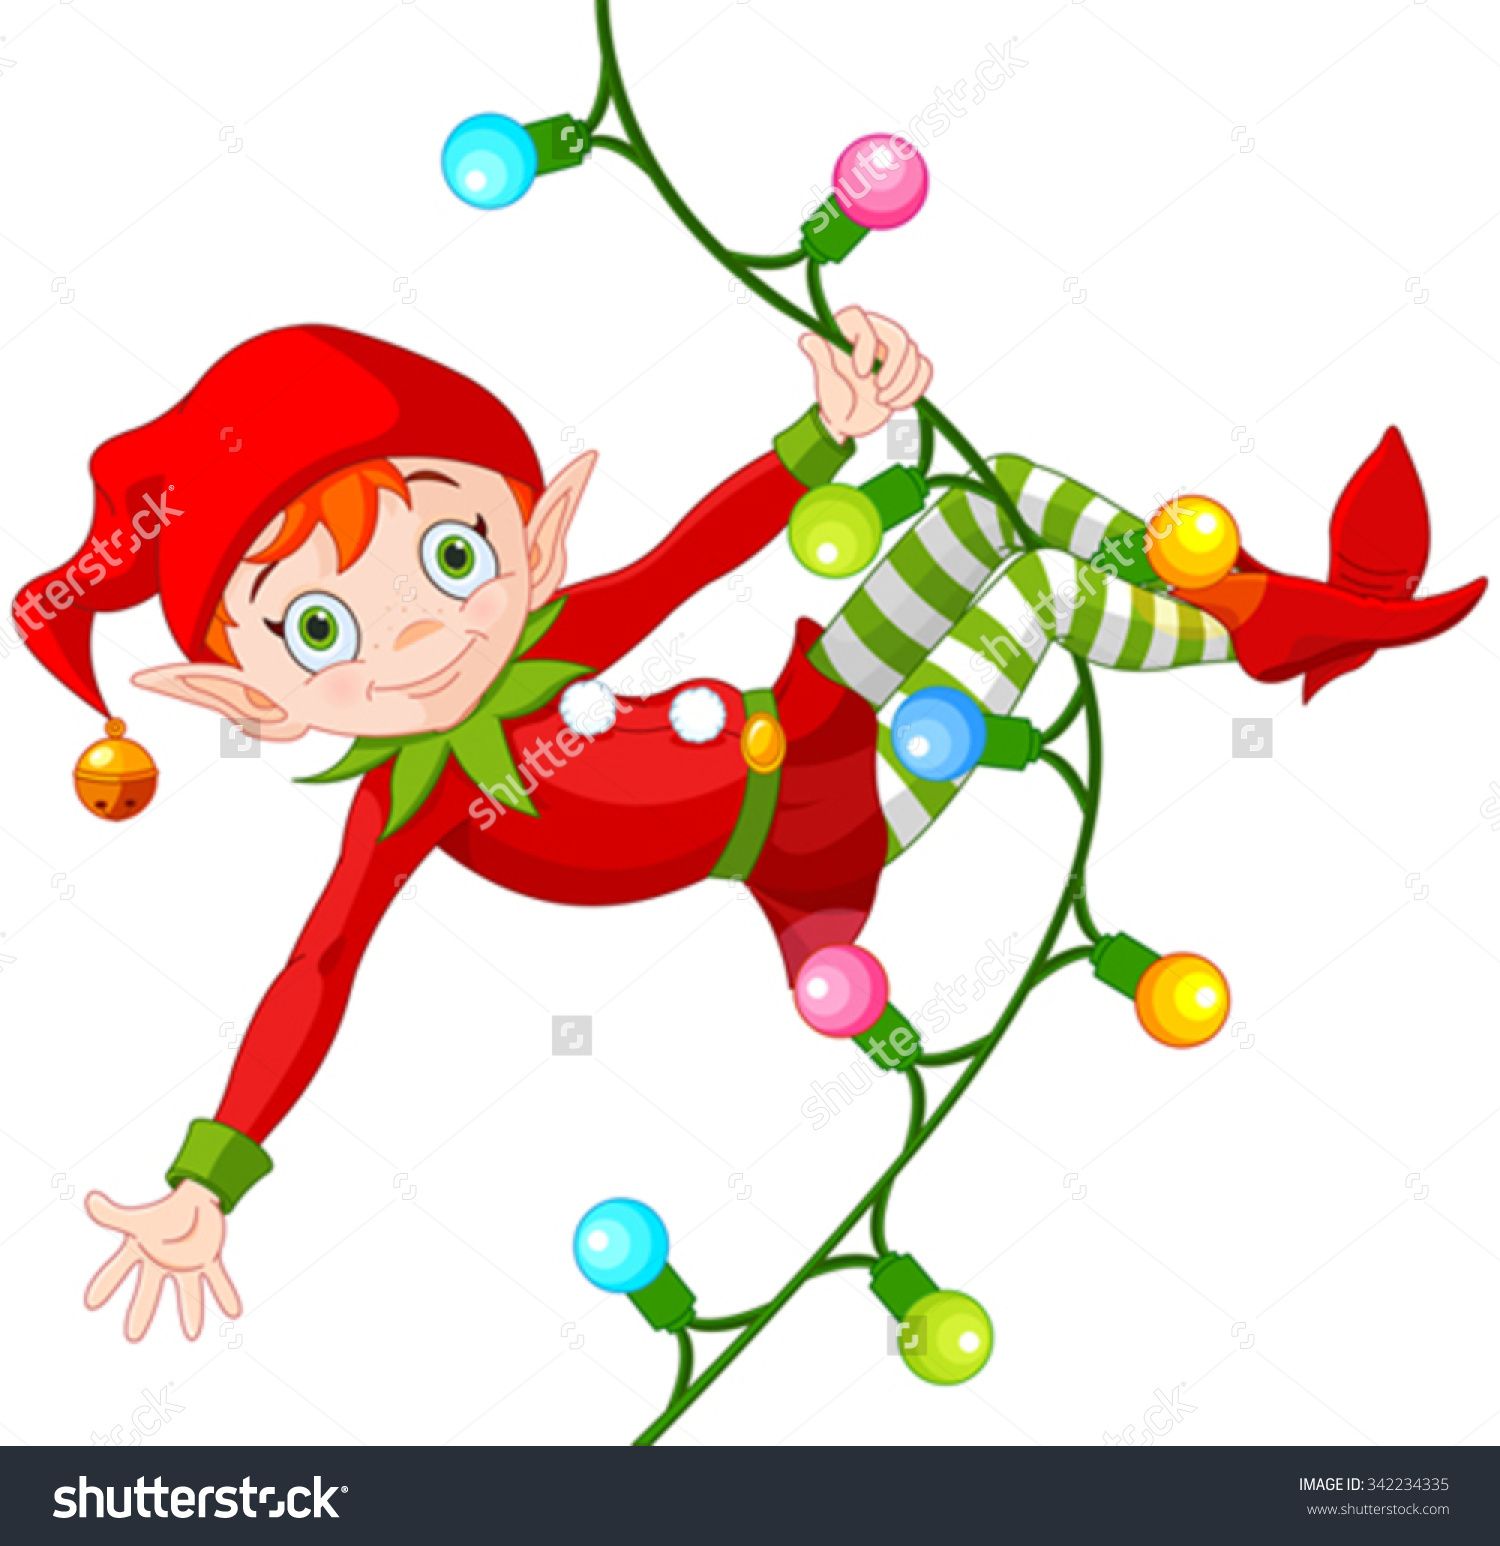 Elf clipart cute, Elf cute Transparent FREE for download on